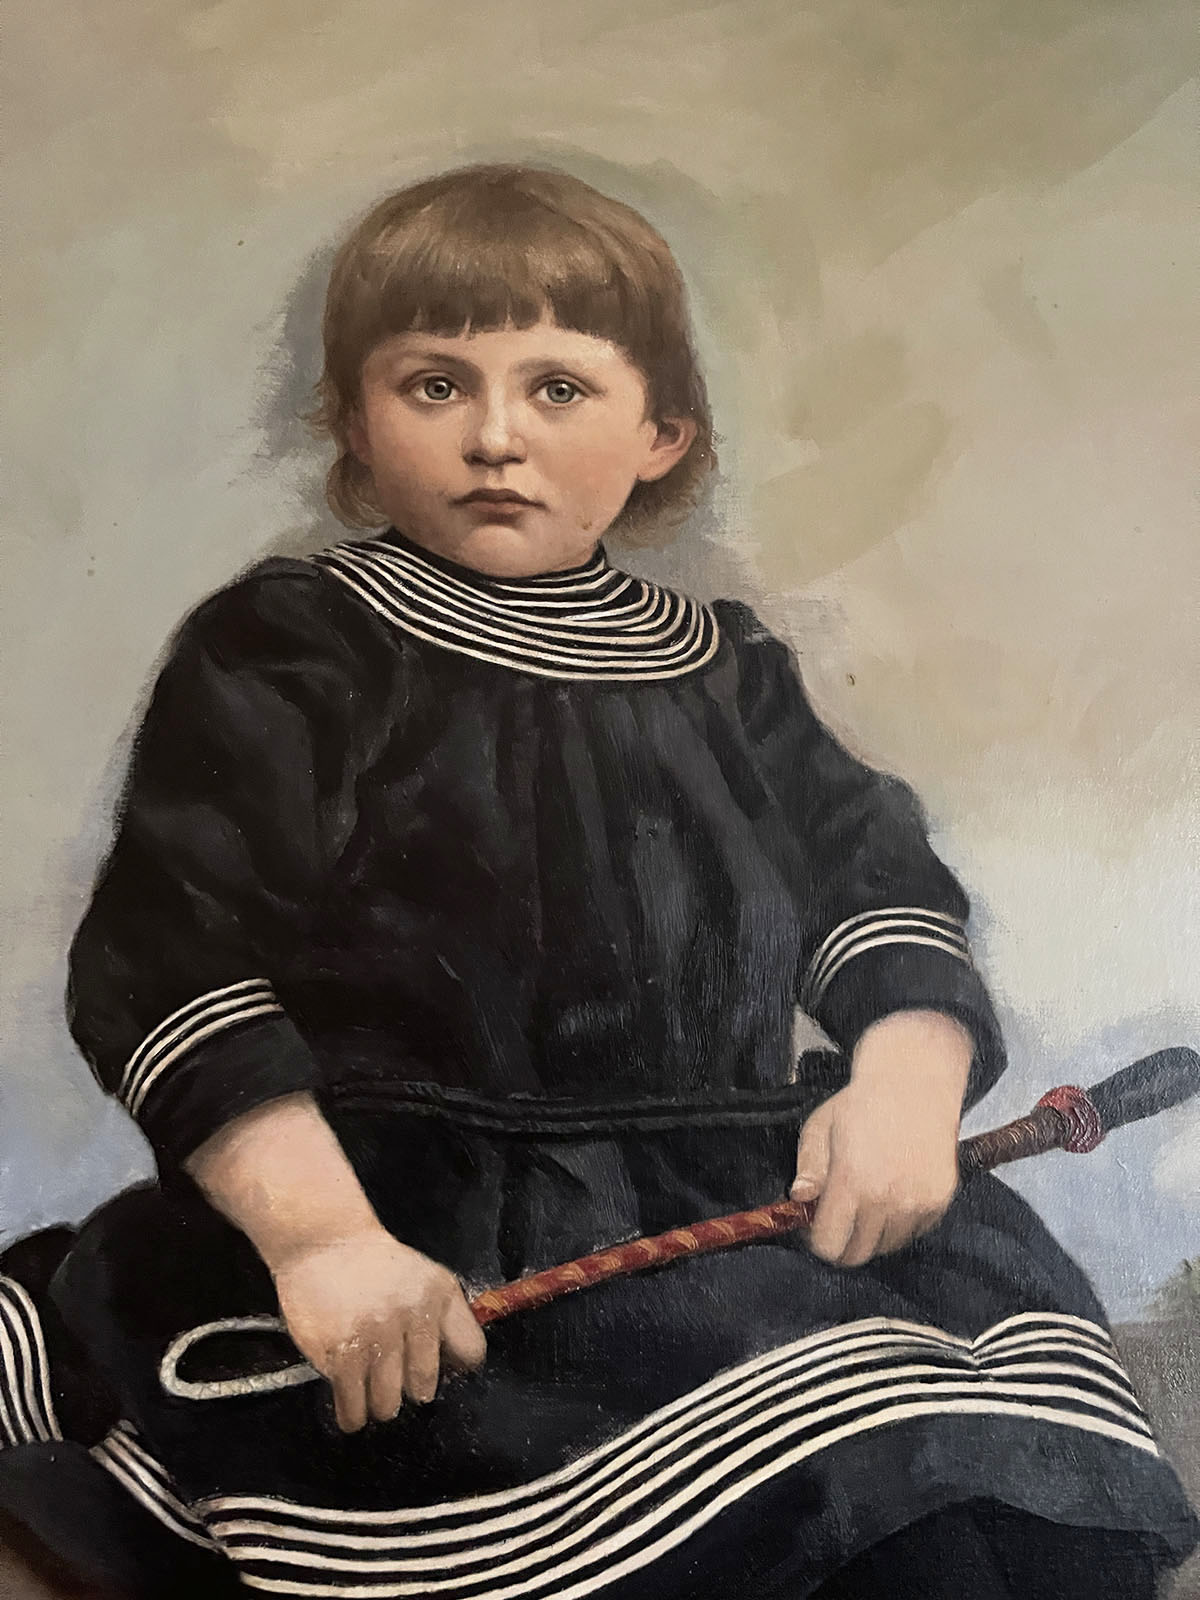 PORTRAIT PAINTING OF A CHILD HOLDING